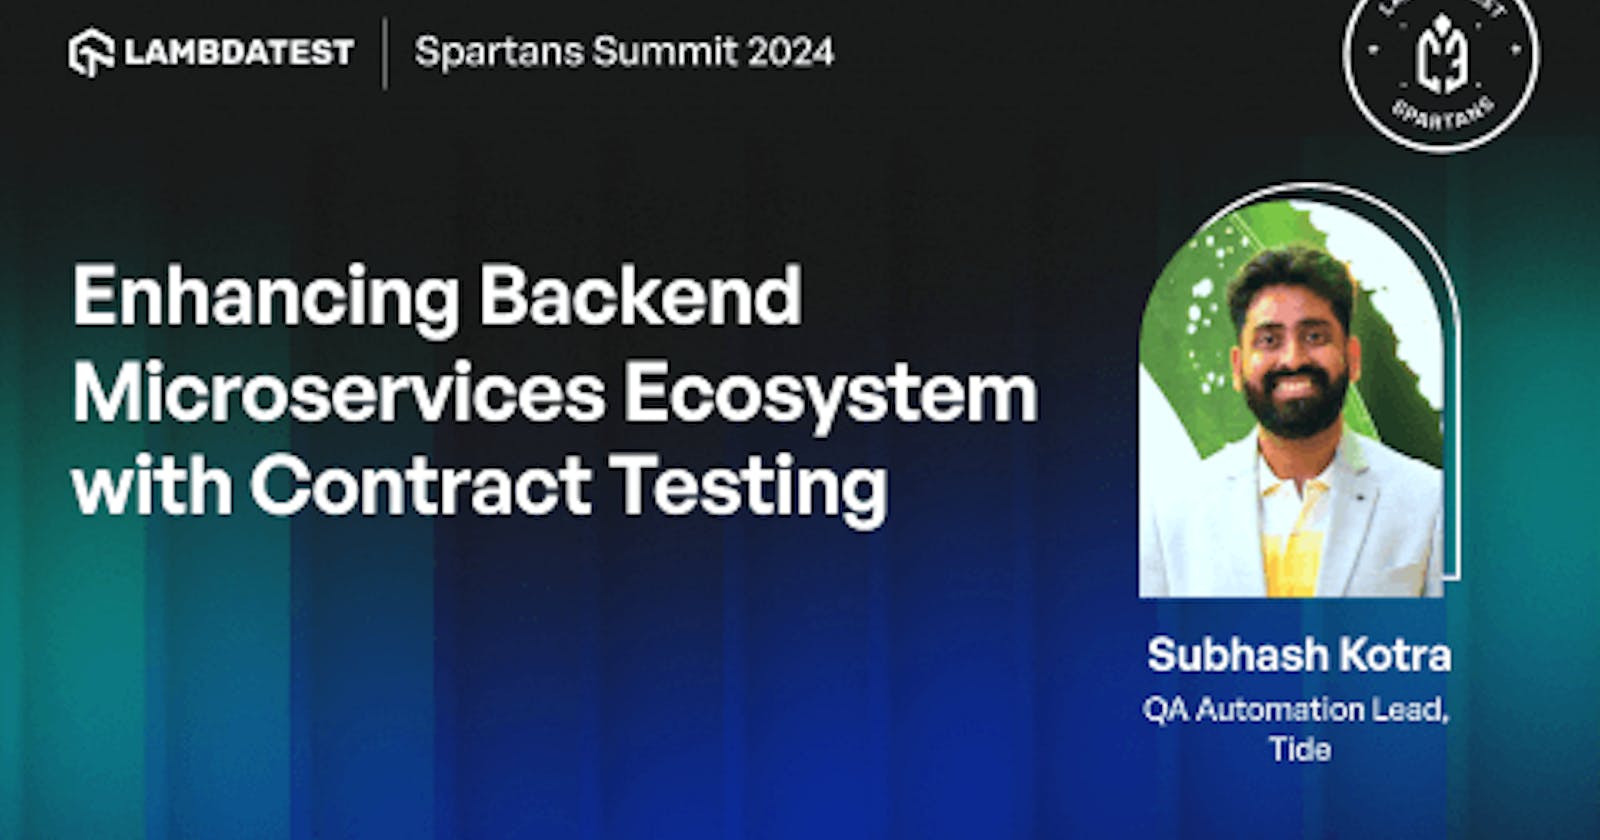 Enhancing Backend Microservices Ecosystem with Contract Testing [Spartans Summit 2024]